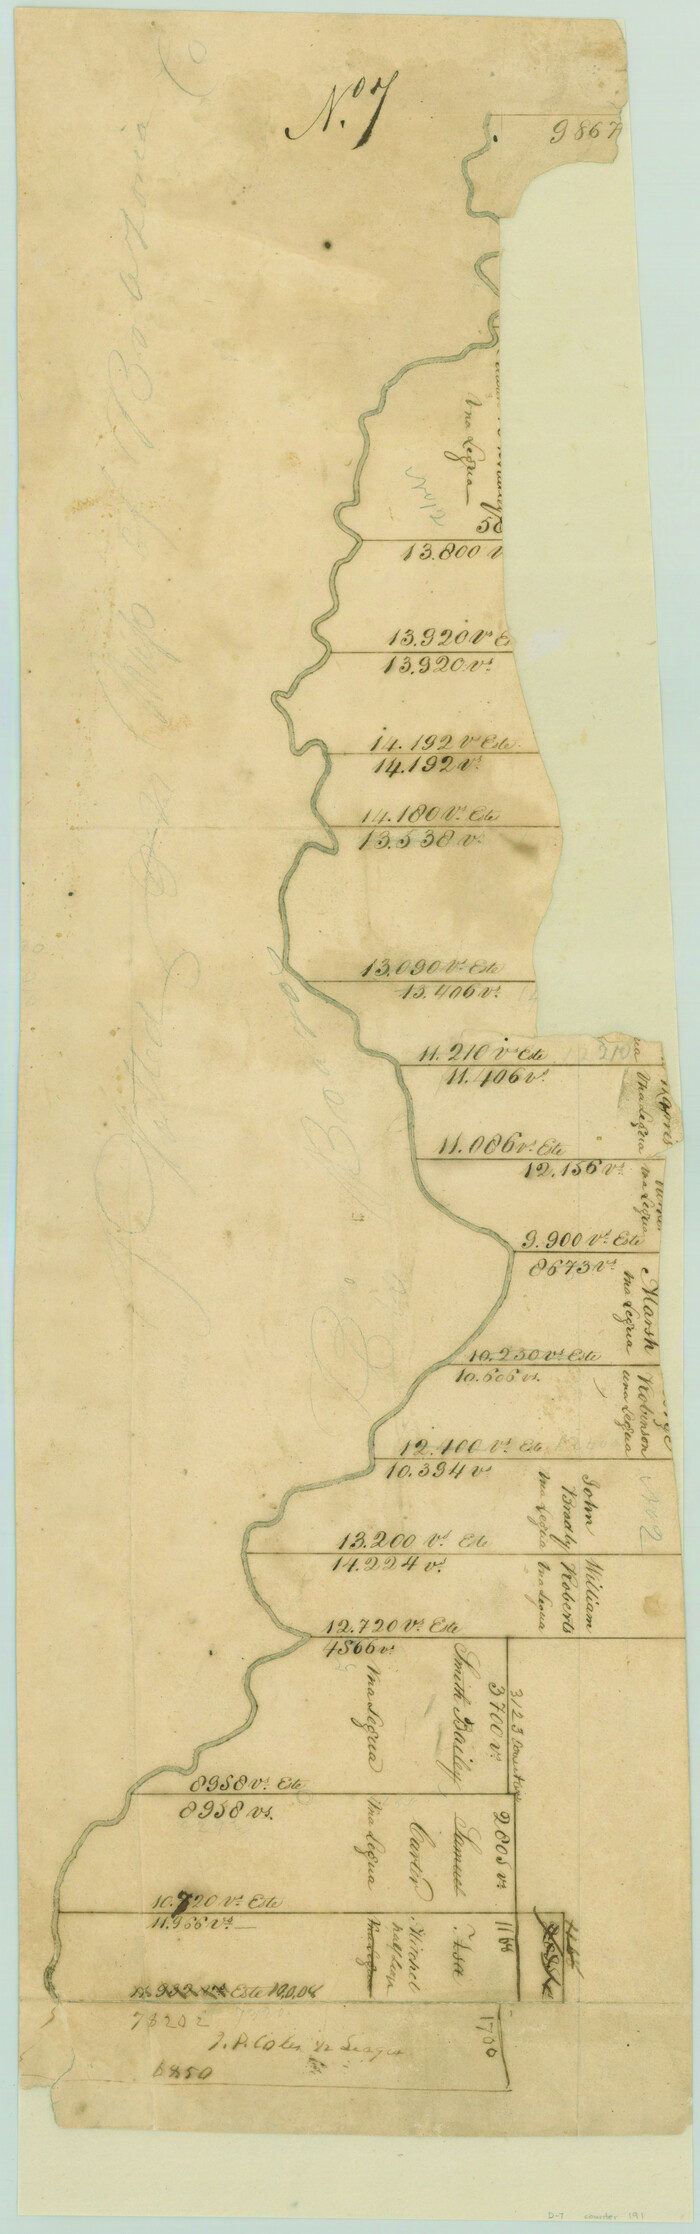 191, [Surveys in Austin's Colony along the east side of the Brazos River], General Map Collection